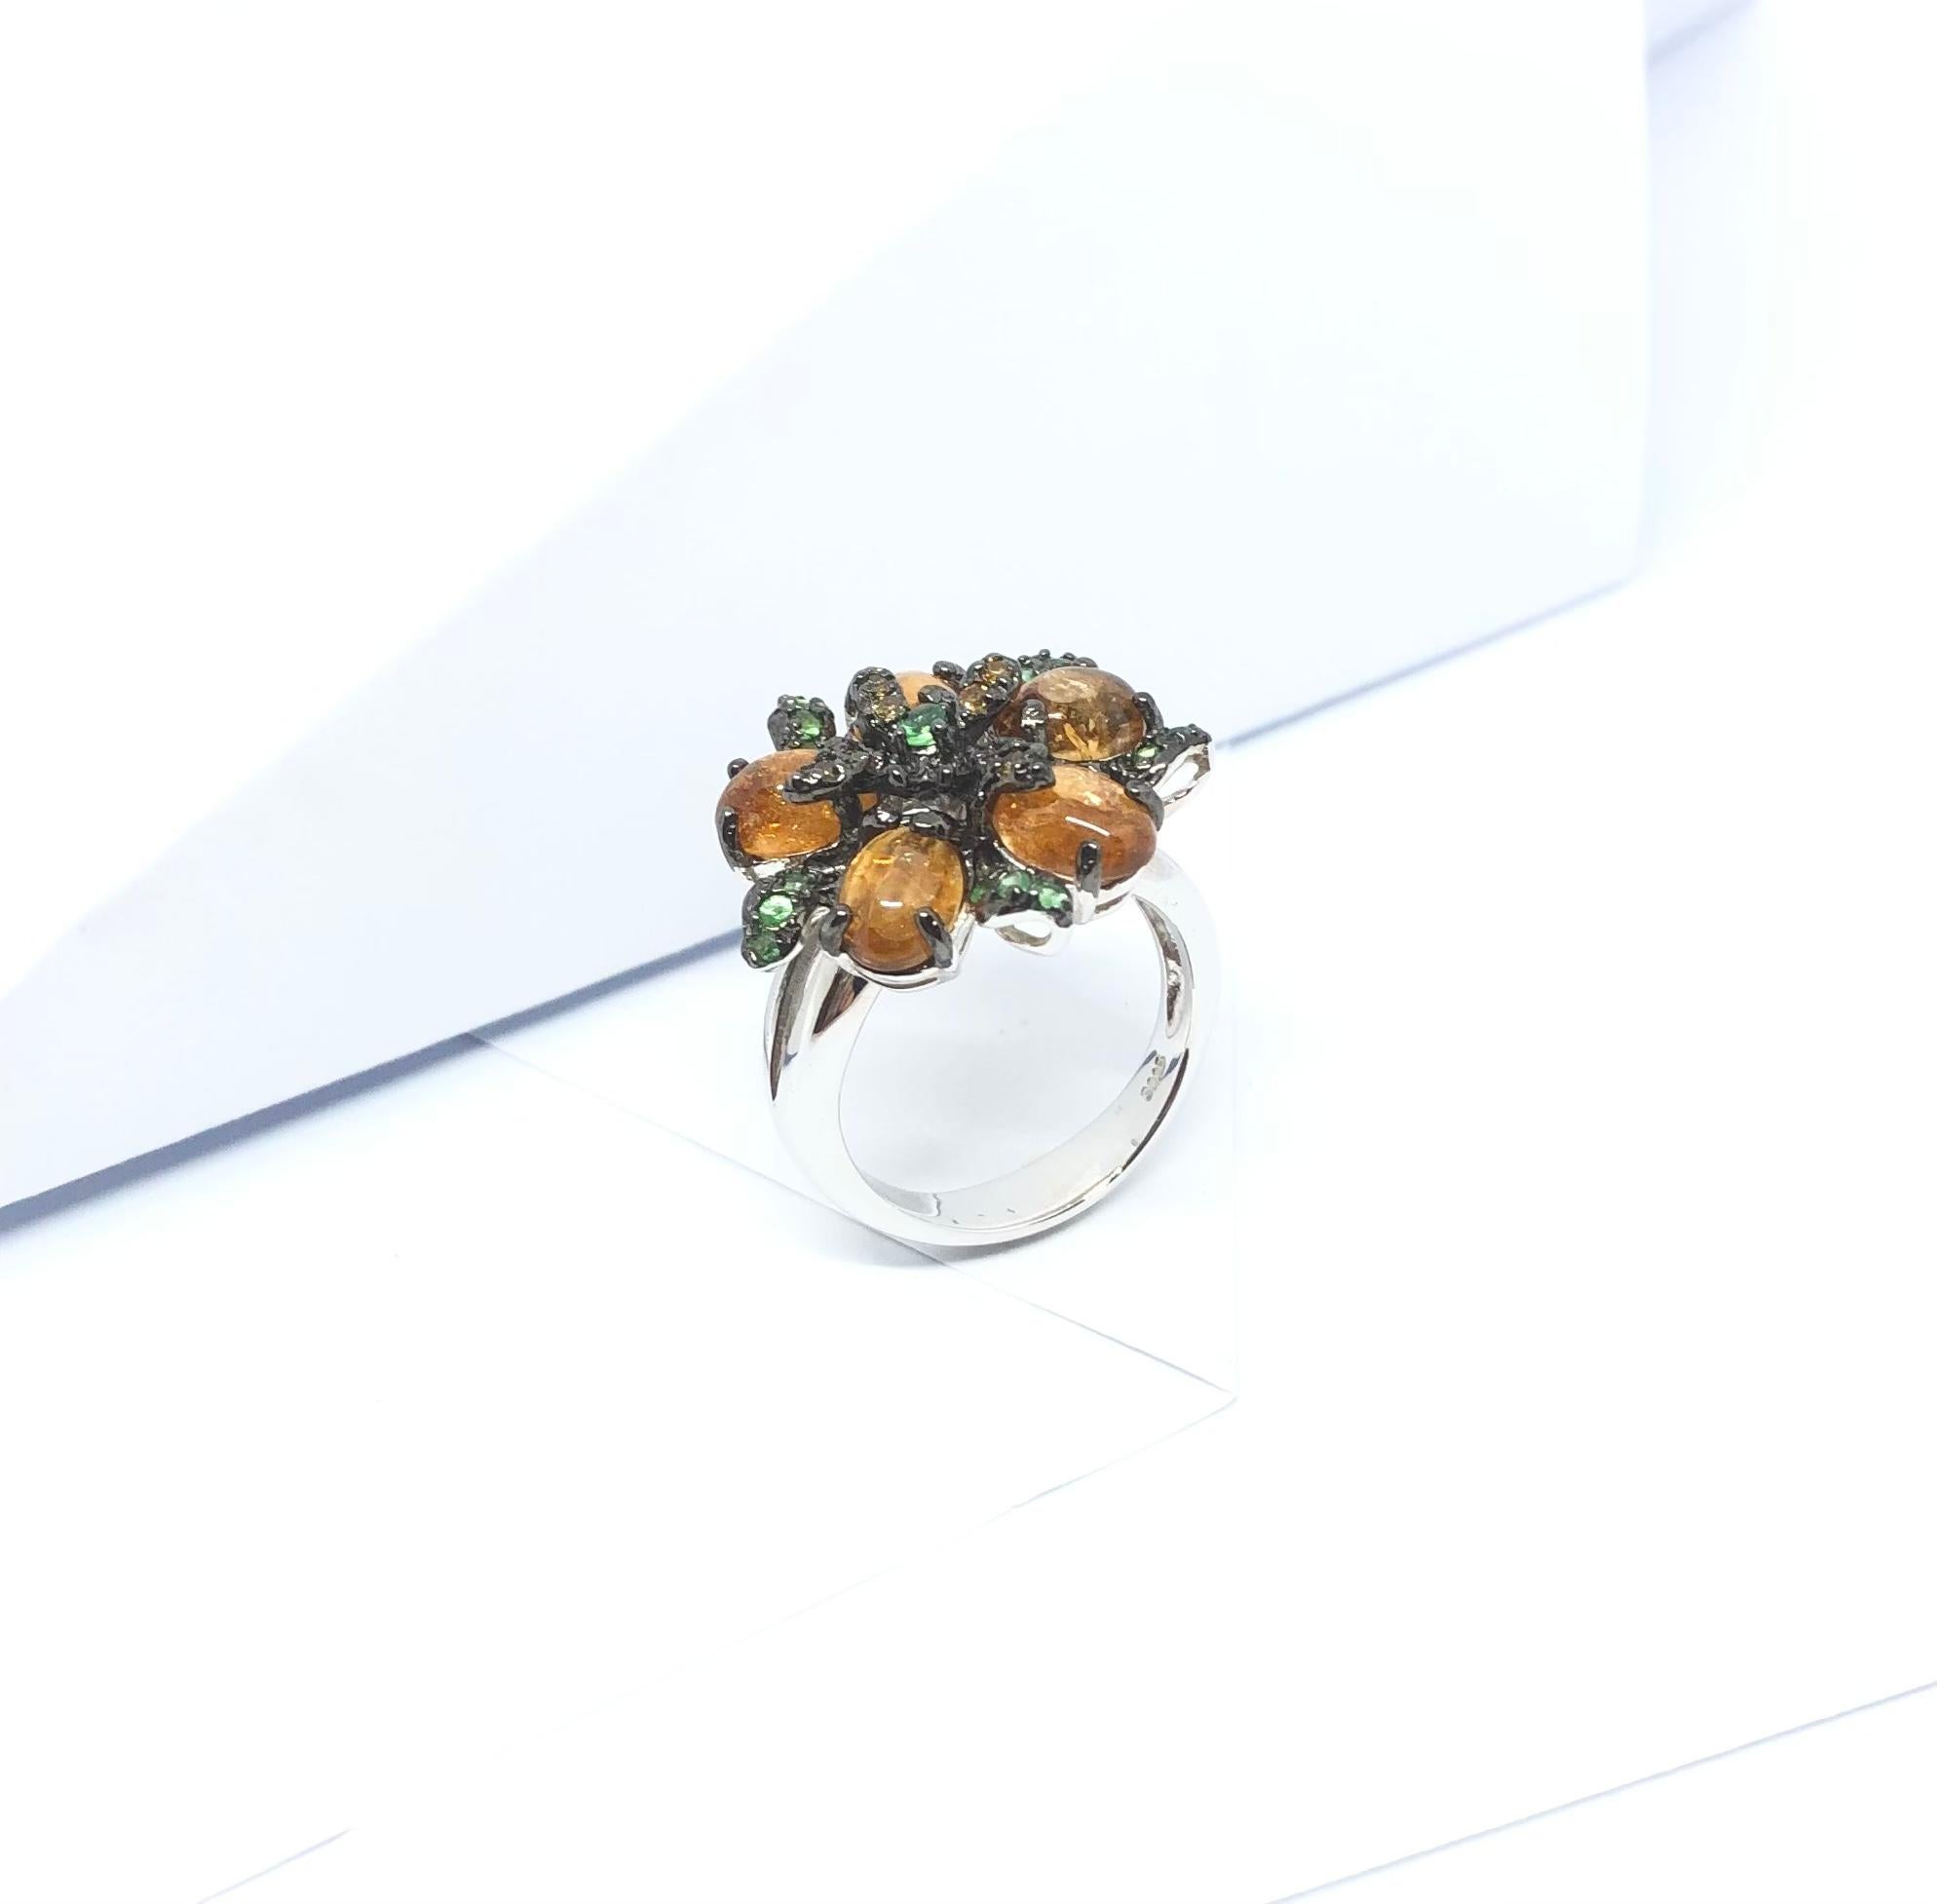 Tourmaline, Sapphire and Tsavorite Ring set in Silver Settings

Width:  2.1 cm 
Length: 2.1 cm
Ring Size: 54
Total Weight: 8.01 grams

*Please note that the silver setting is plated with rhodium to promote shine and help prevent oxidation.  However,